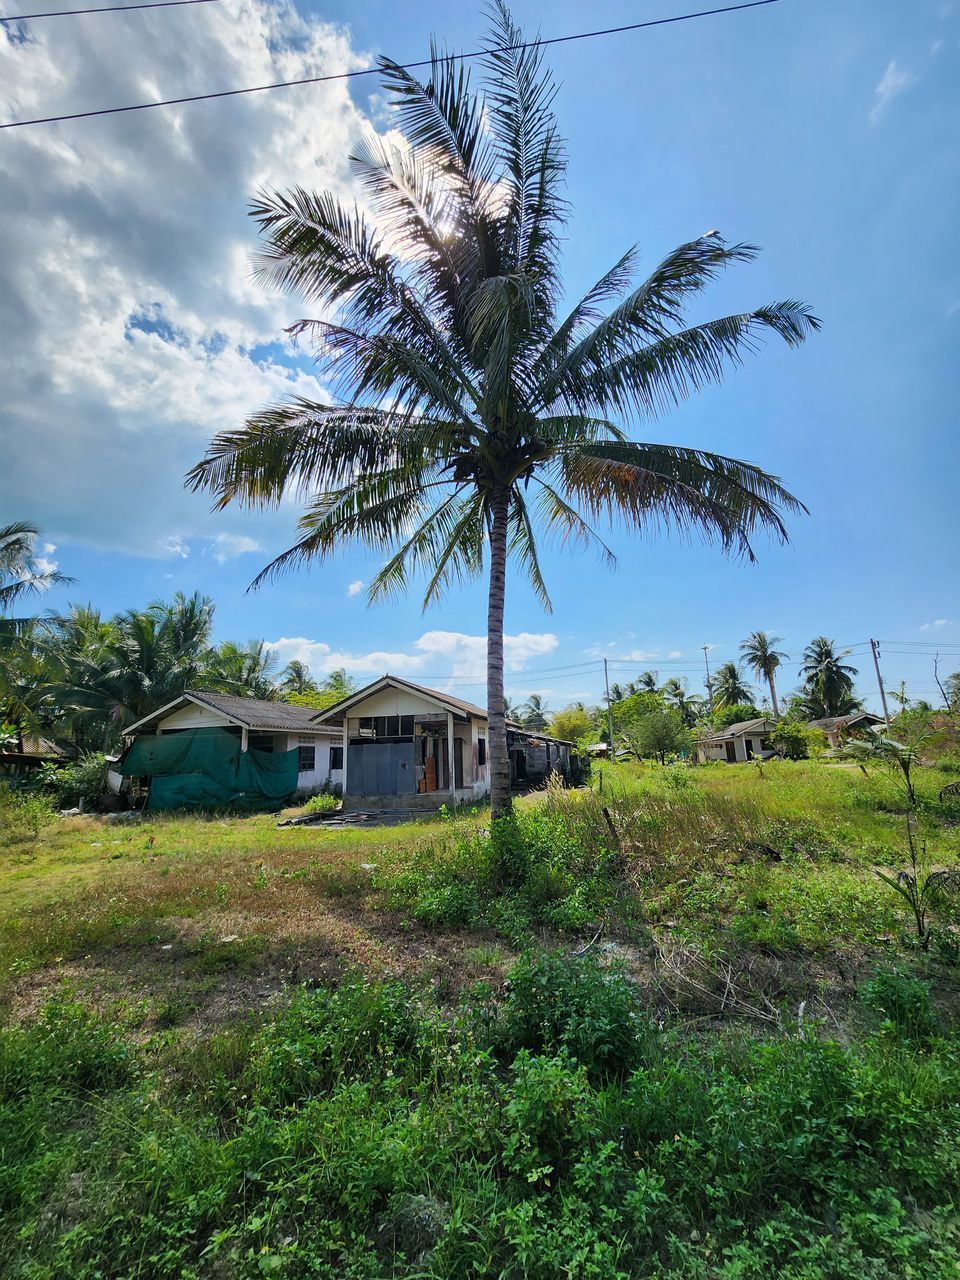 tree, plant, nature, tropical climate, sky, palm tree, water, no people, beauty in nature, day, land, cloud, growth, outdoors, reflection, green, architecture, scenics - nature, environment, flower, travel destinations, travel, blue, tranquility, built structure, coconut palm tree